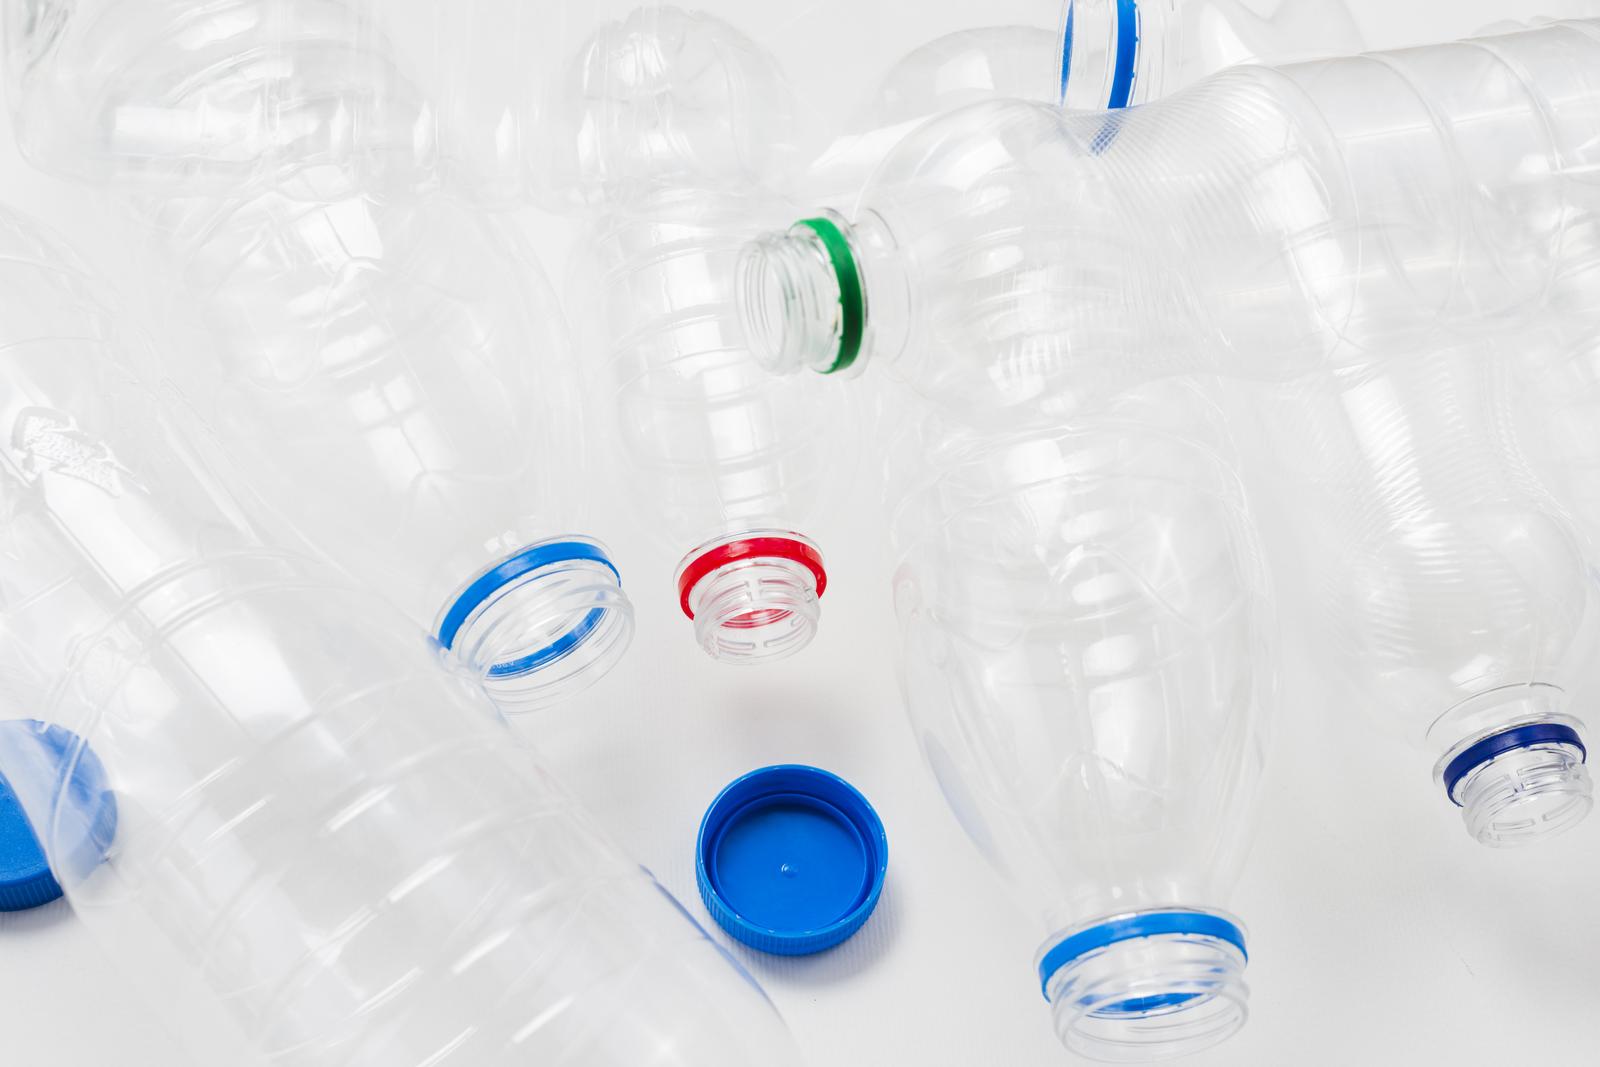 VIKTORI AVANG TÜH - Manufacture of other plastic products   in Estonia